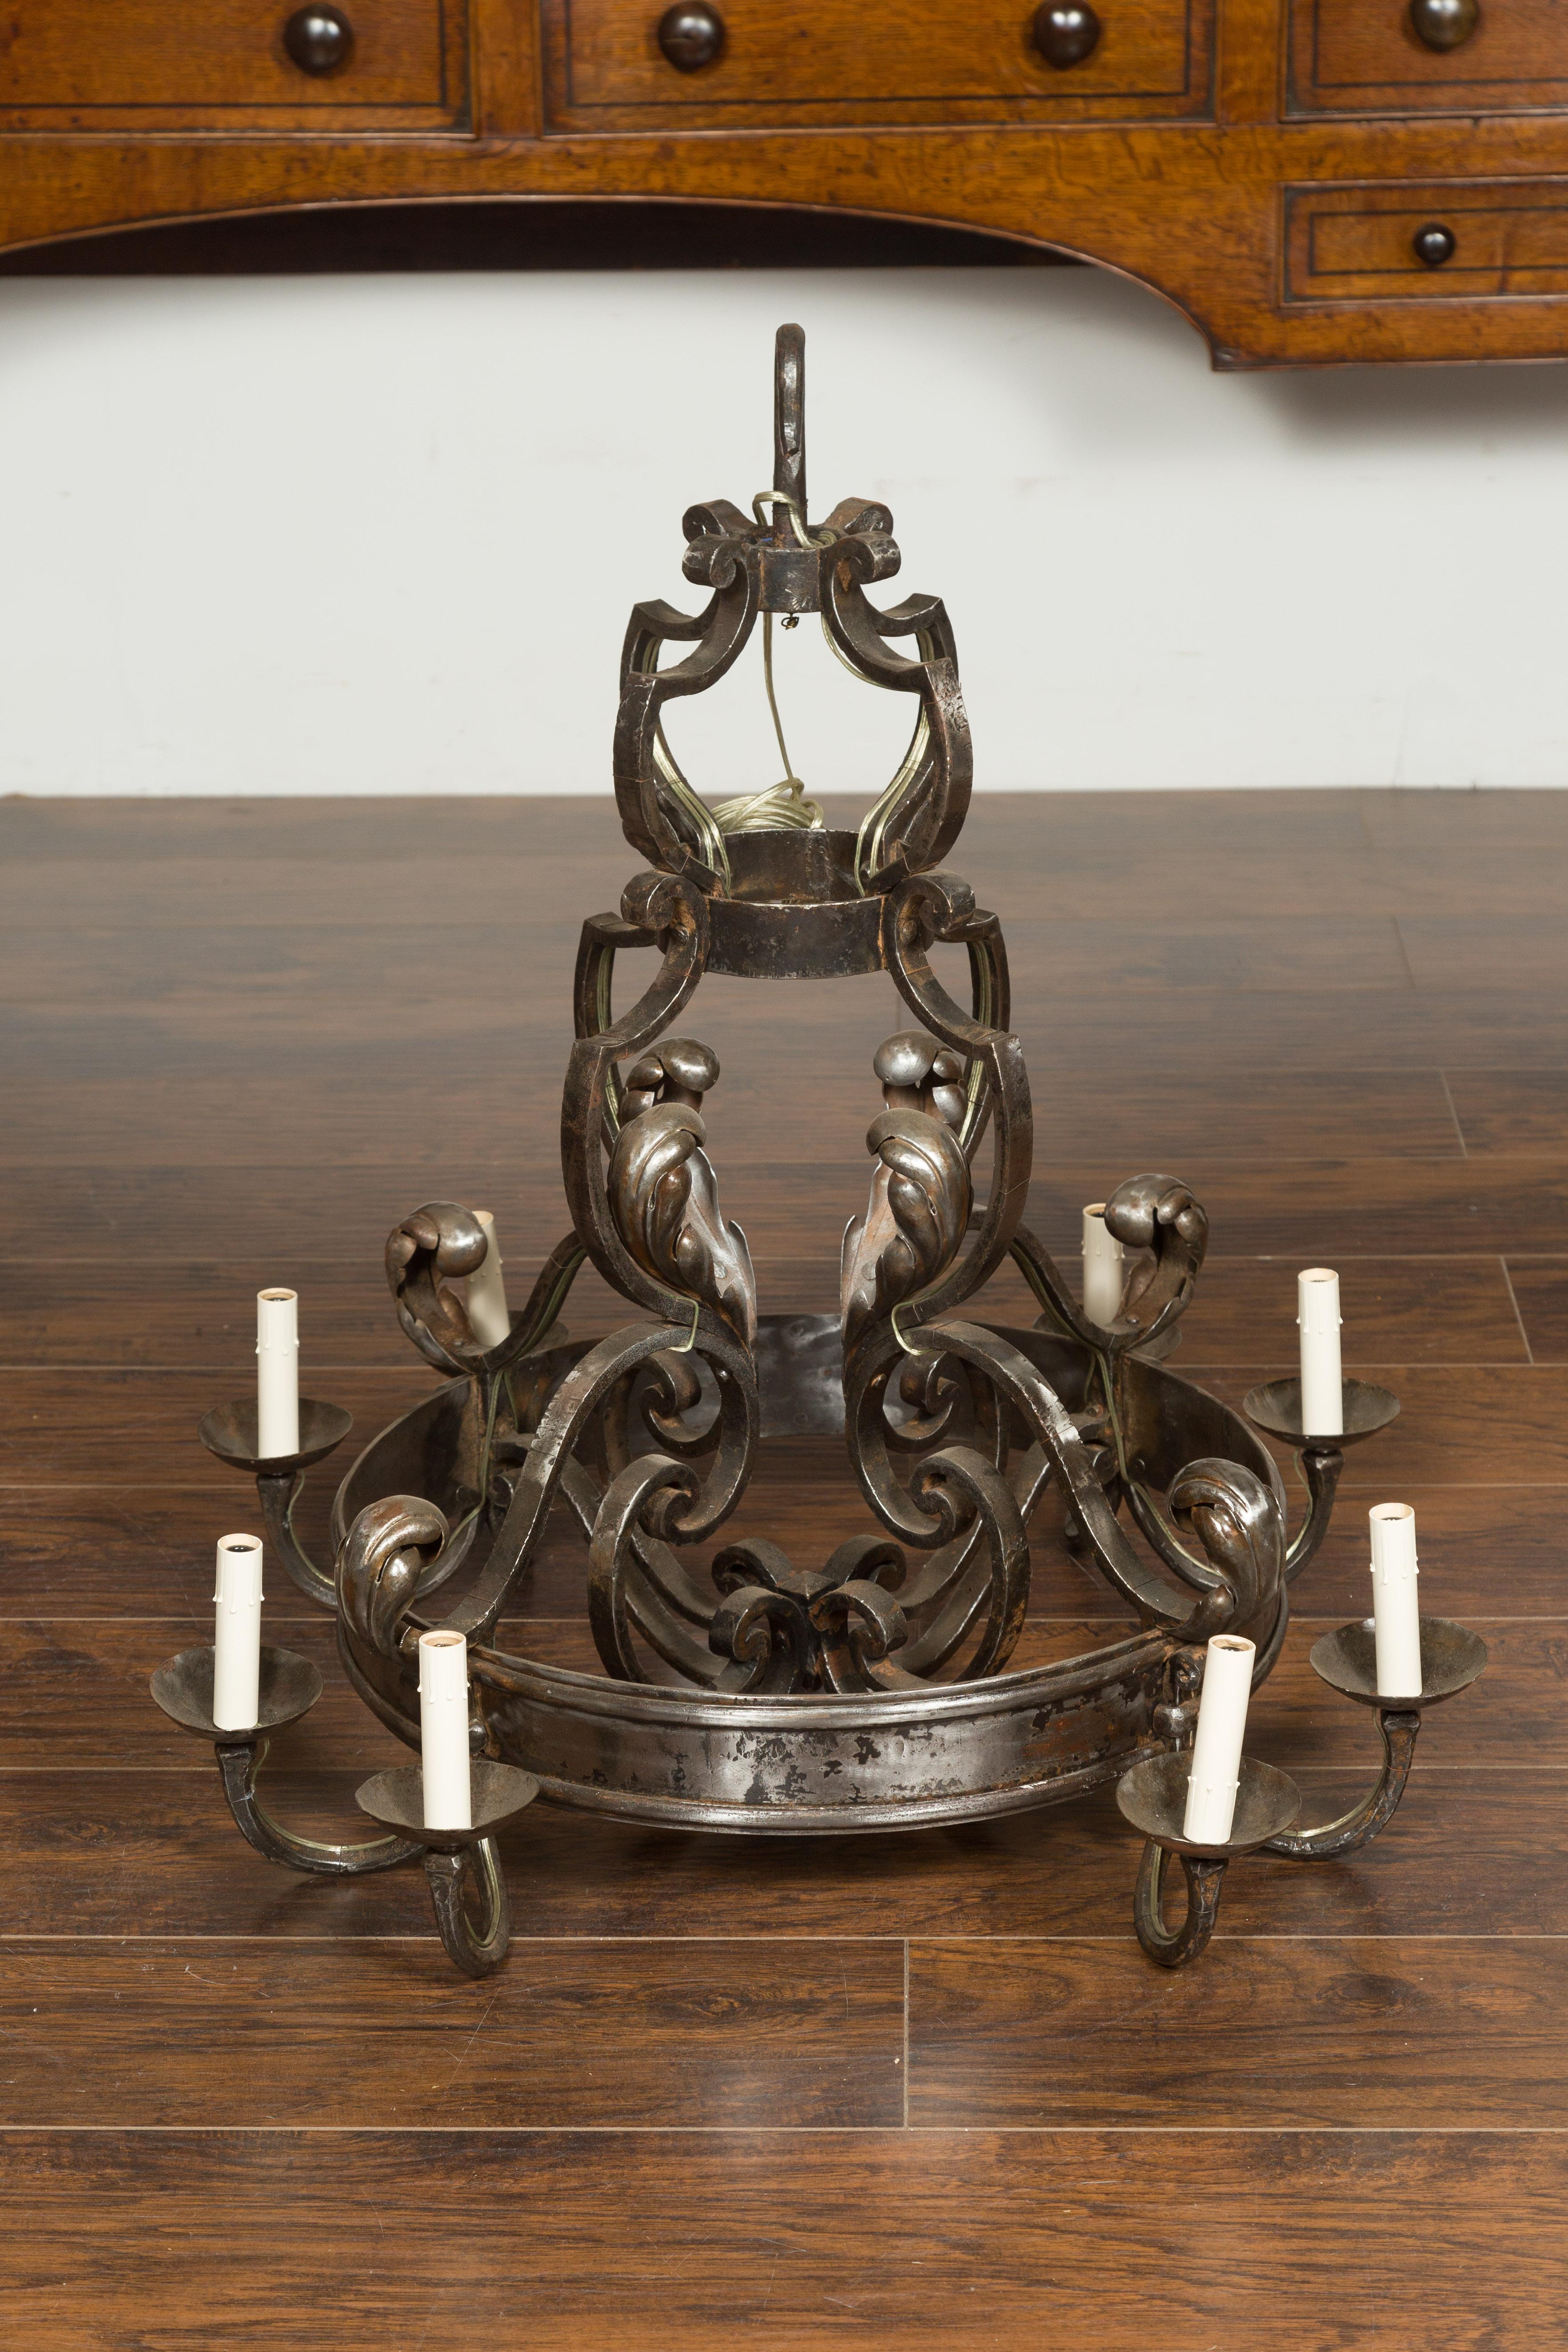 Midcentury French Polished Steel Eight Light Acanthus Leaves Ring Chandelier In Good Condition For Sale In Atlanta, GA